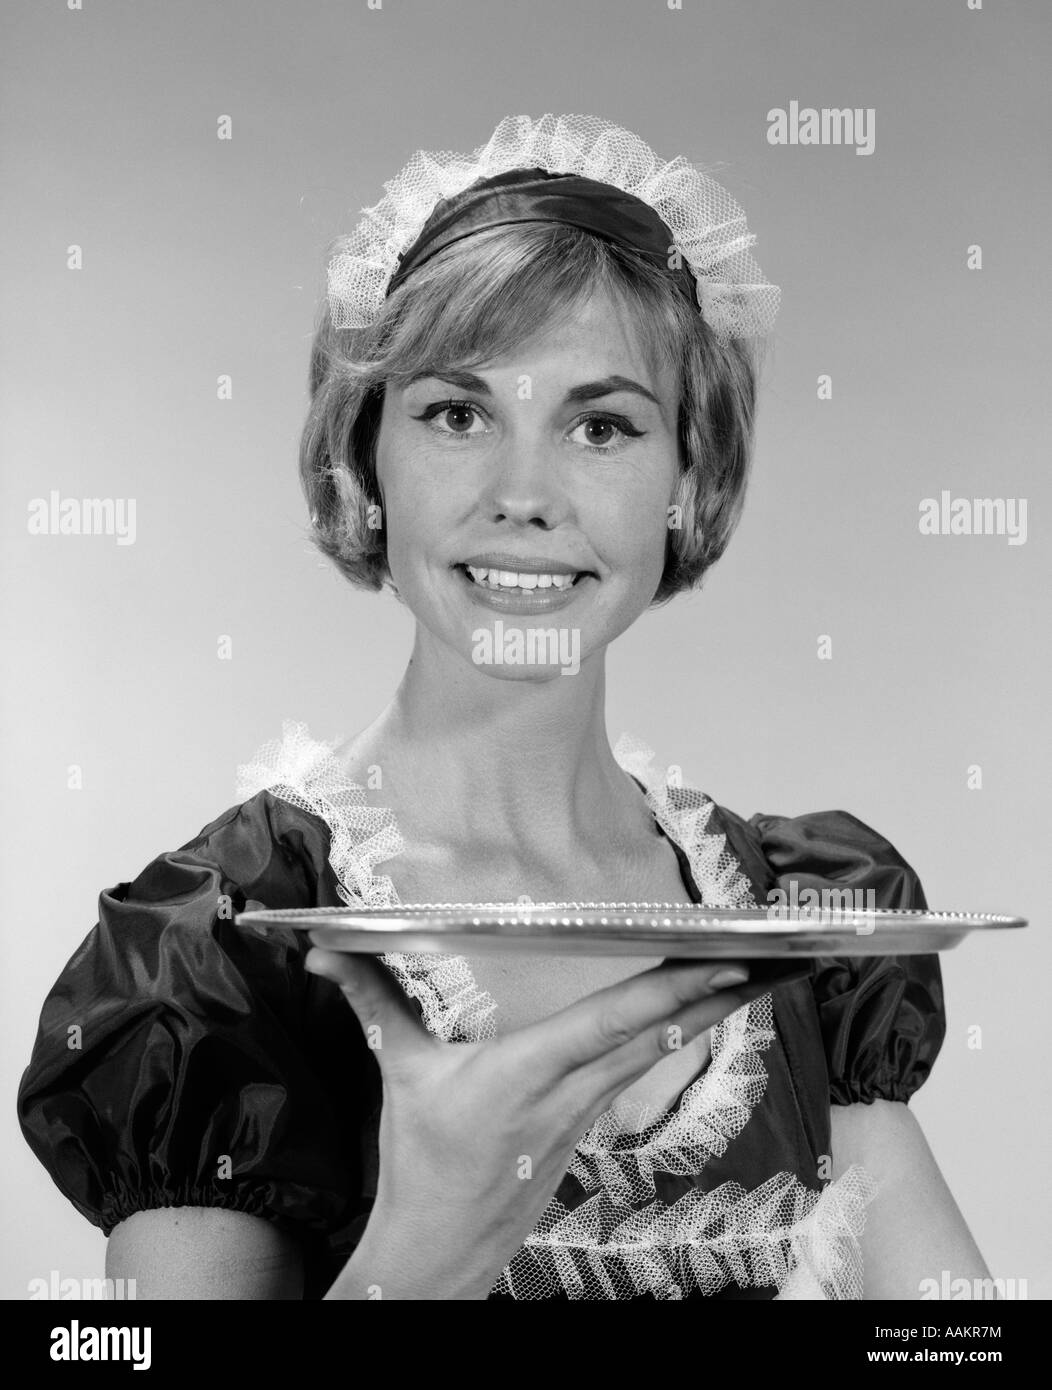 1960s GIRL IN WAITRESS UNIFORM WITH MATCHING LACE HEADPIECE SMILING WHILE HOLDING UP AN EMPTY SERVING TRAY Stock Photo